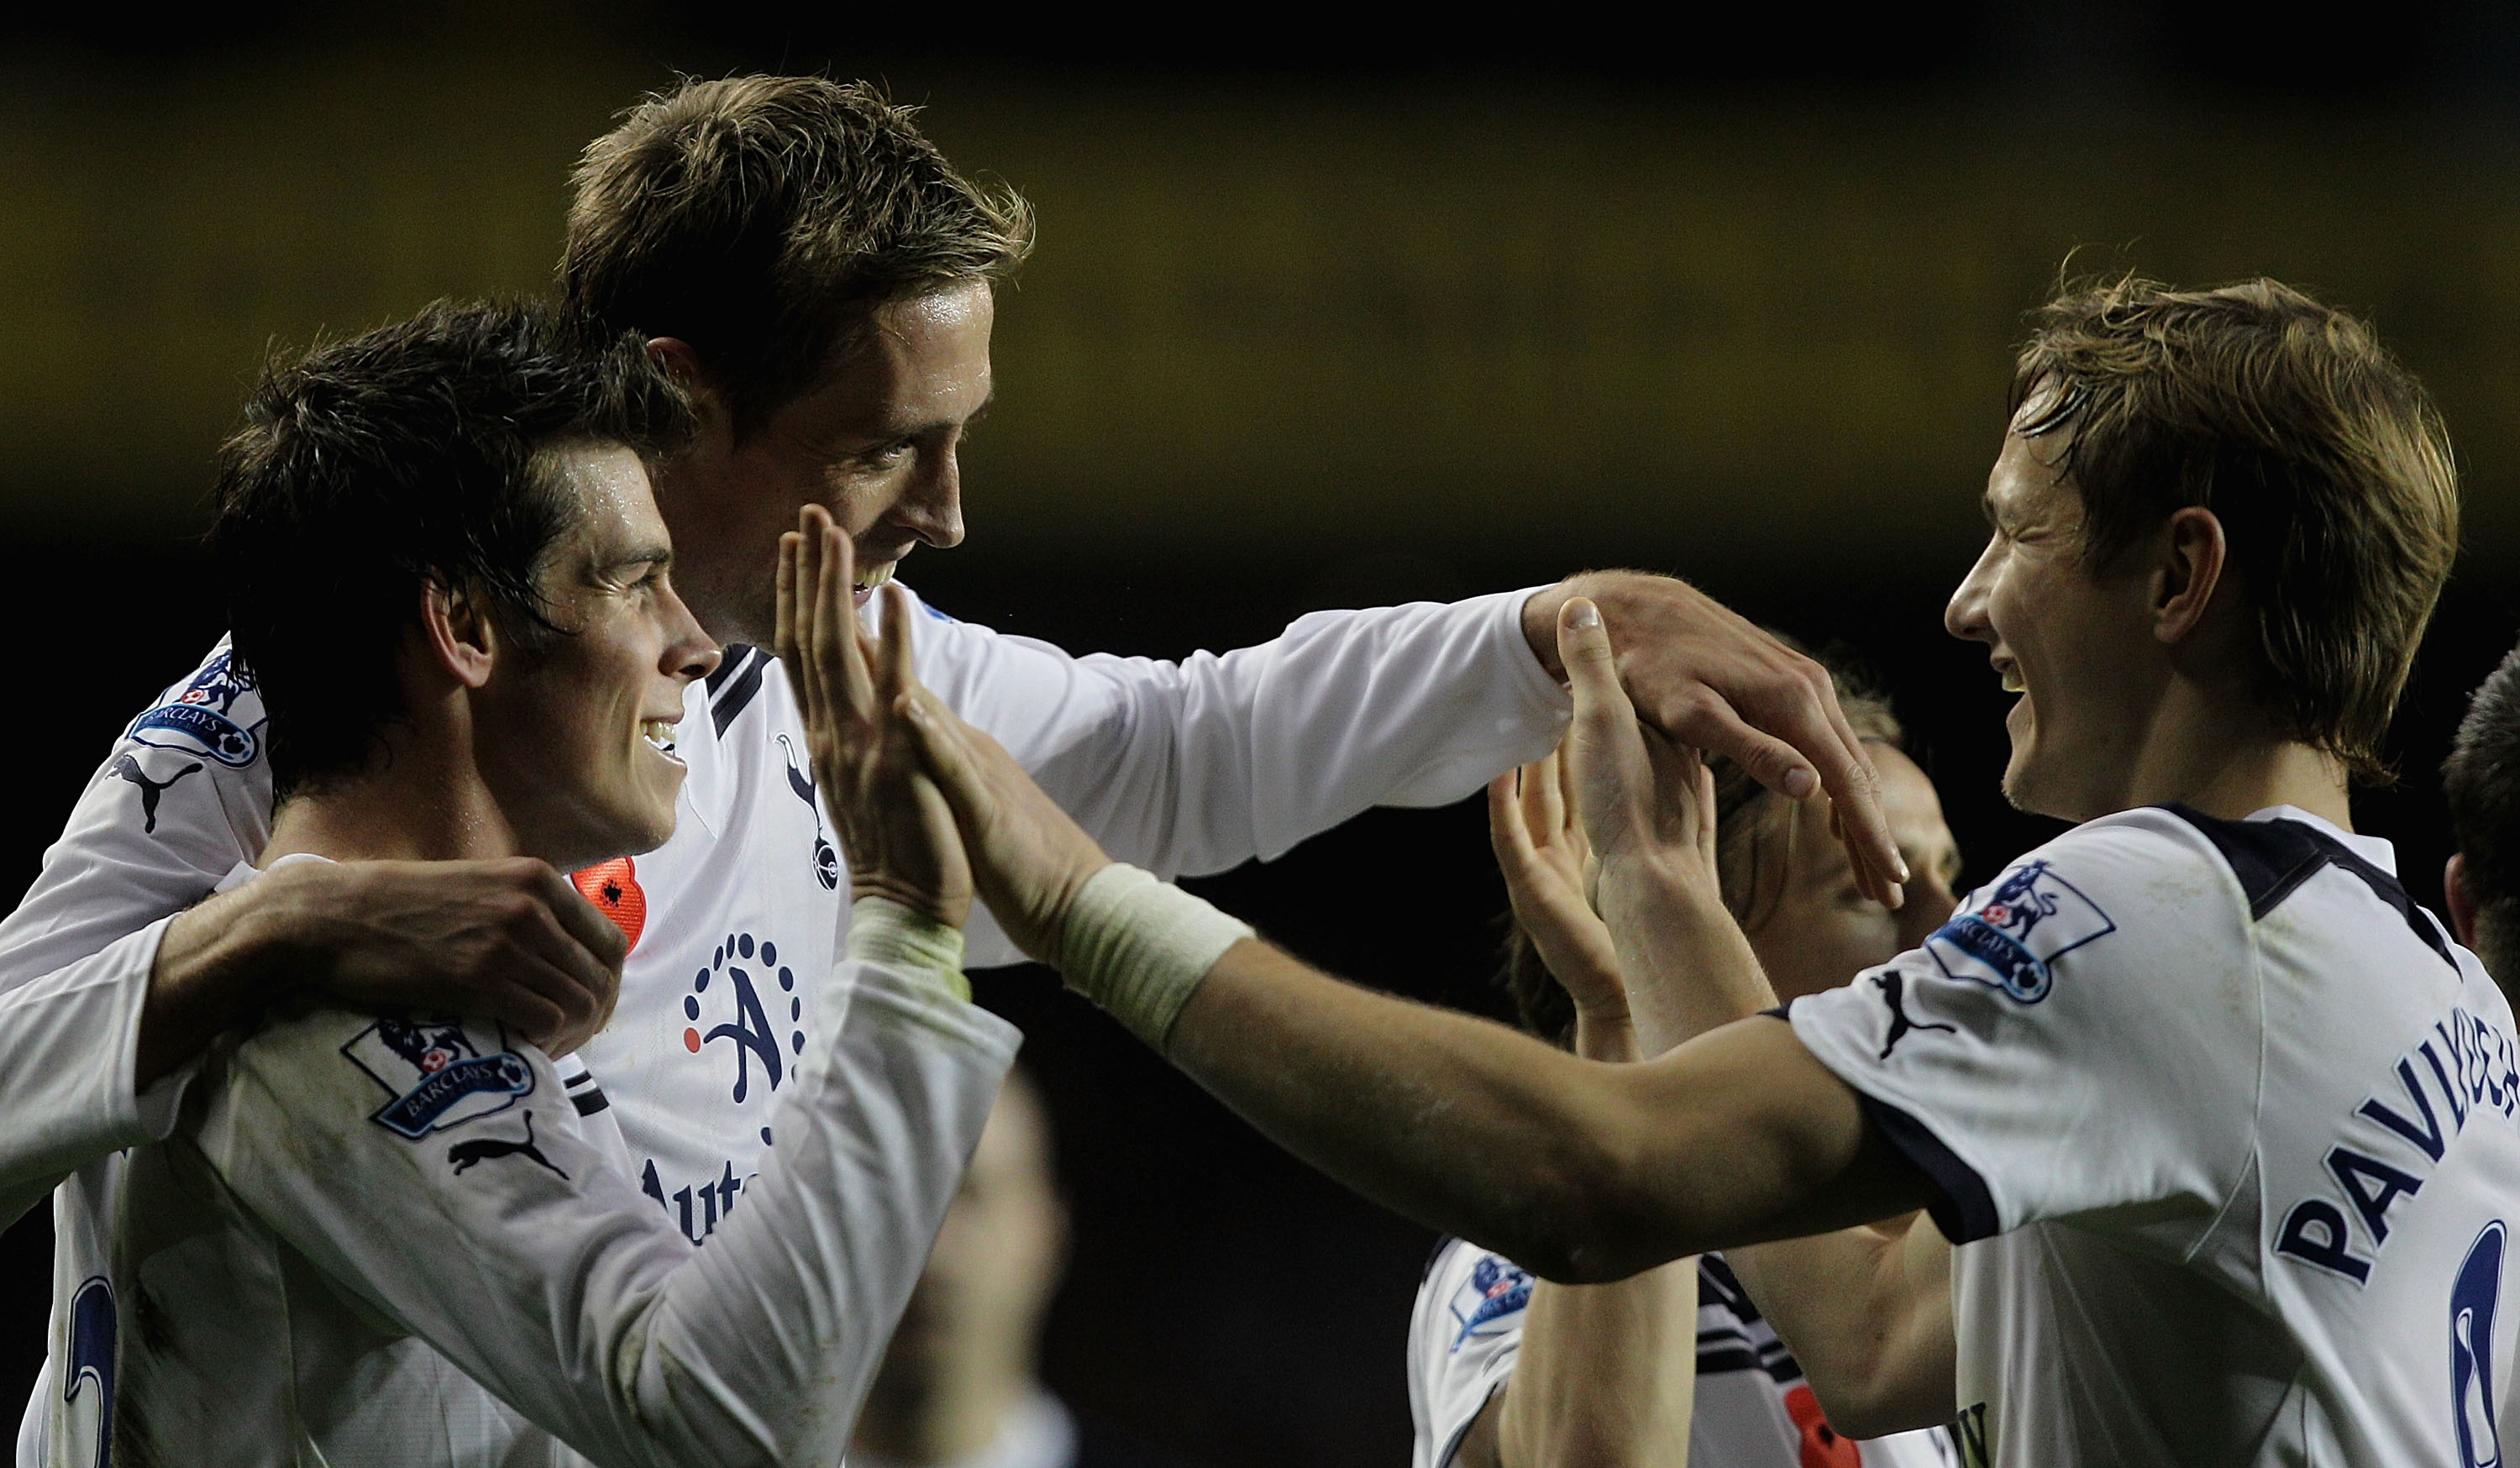 LONDON, ENGLAND - NOVEMBER 13:  (L - R) Gareth Bale, Peter Crouch and Roman Pavlyuchenko goal scorers for Tottenham celebrate after Crouch scored their third goal during the Barclays Premier League match between Tottenham Hotspur and Blackburn Rovers at W